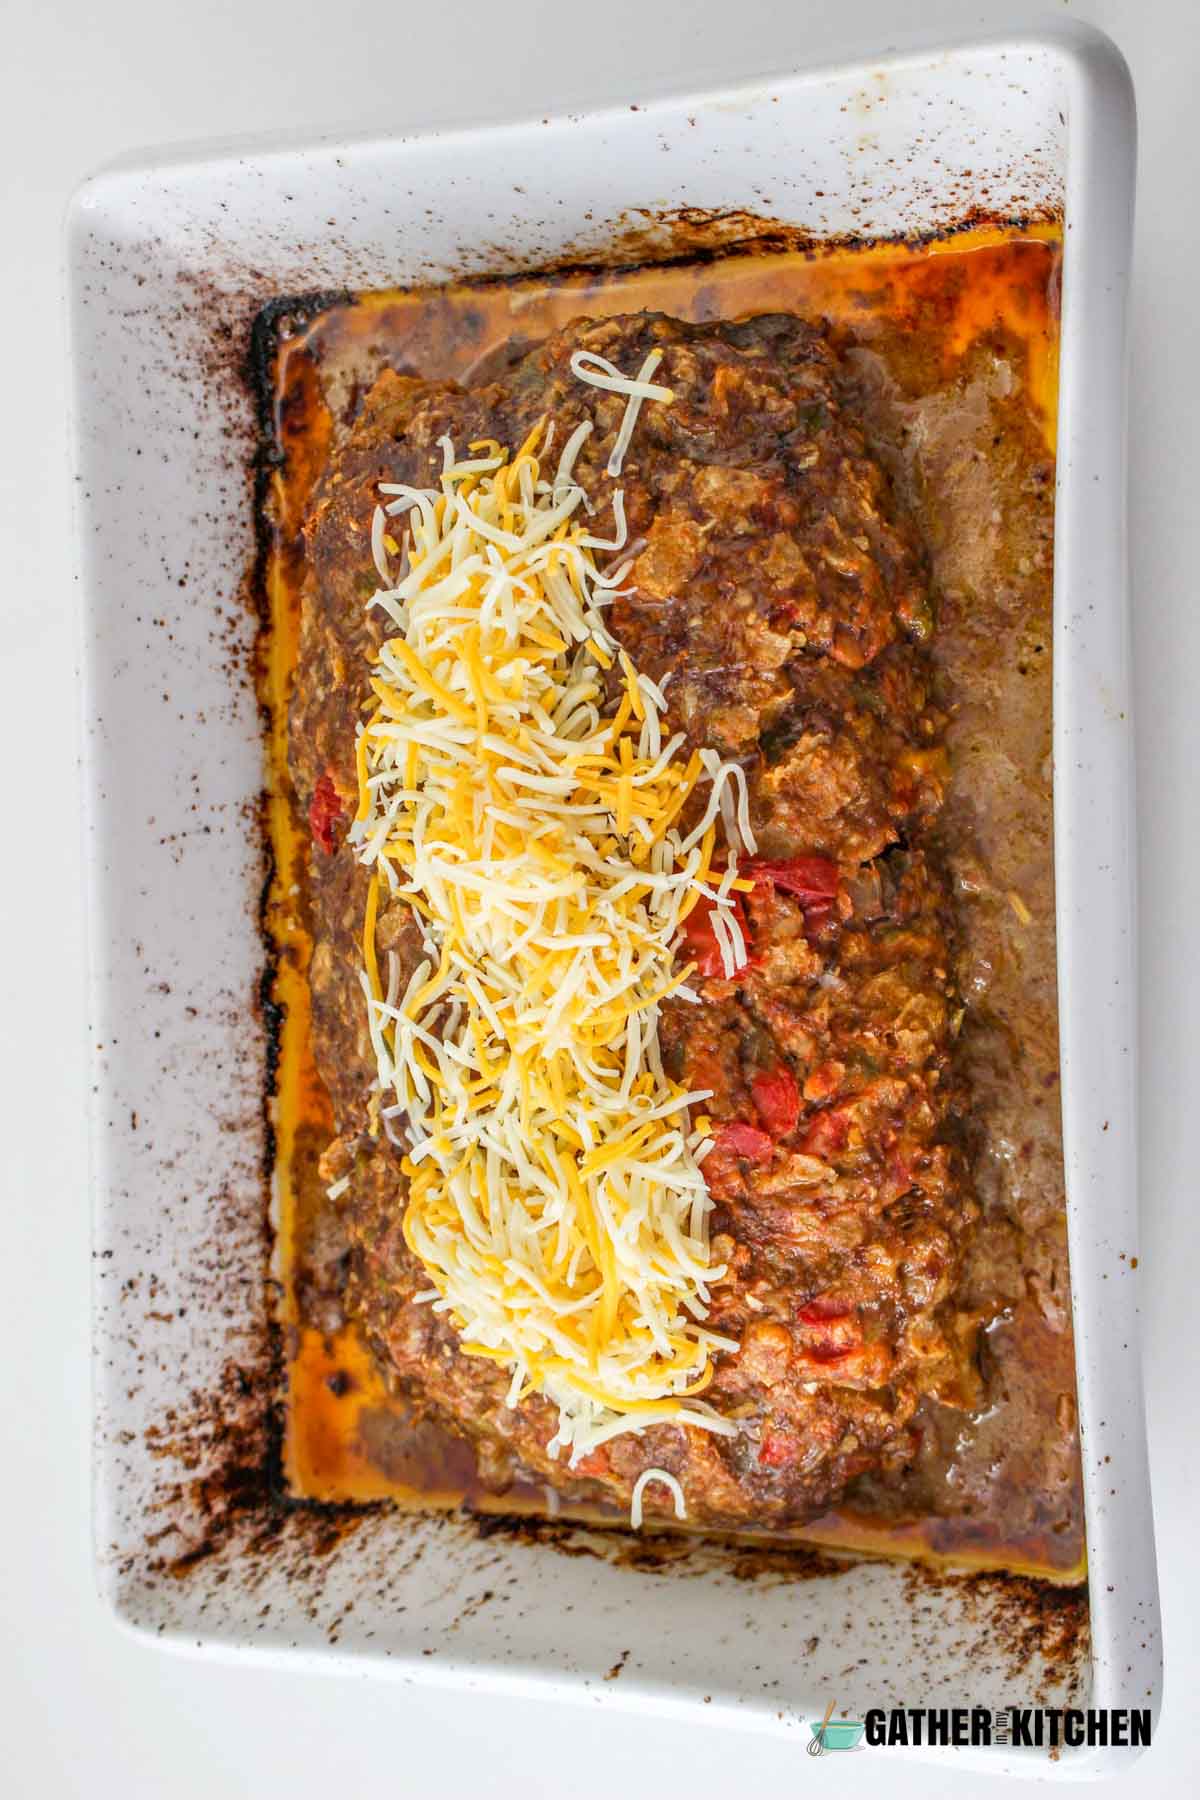 Cheese added to cooked meatloaf.